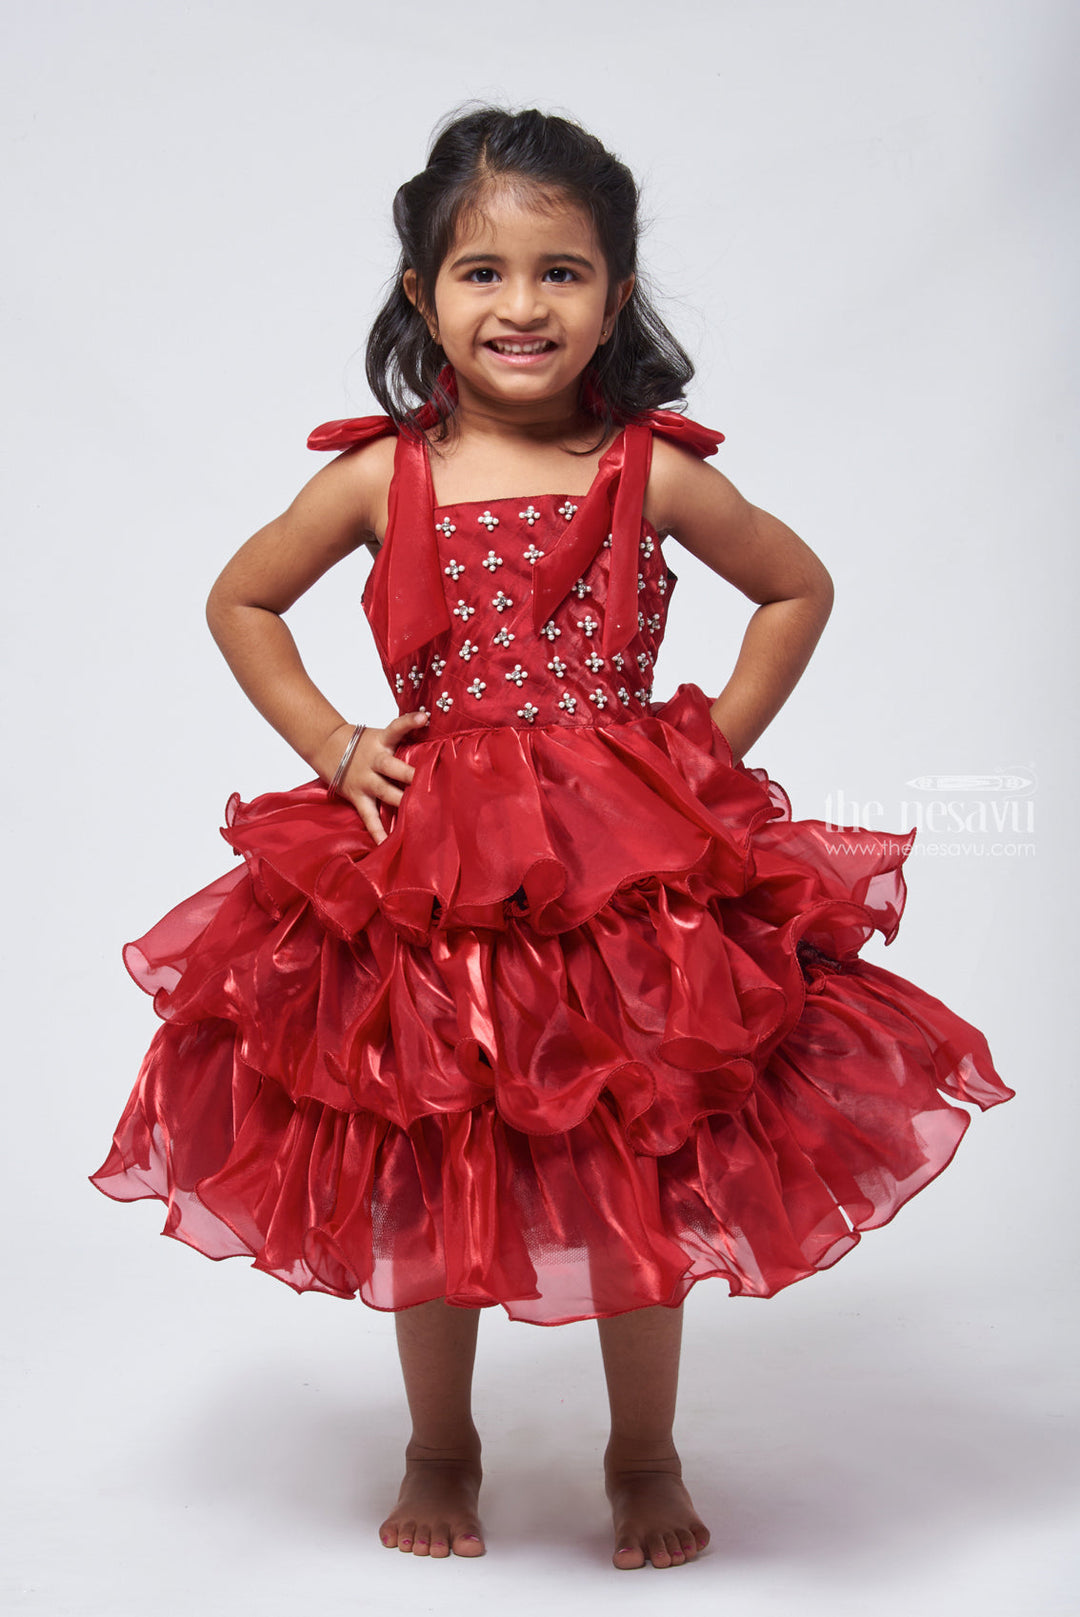 The Nesavu Party Frock Elegant Pink Ruffled Party Frock: Layered Design with Stone-Embellished Yoke for Girls Nesavu 16 (1Y) / Pink PF123A-16 Ruffled Layered Party Frock | Party Wear for Girls | The Nesavu